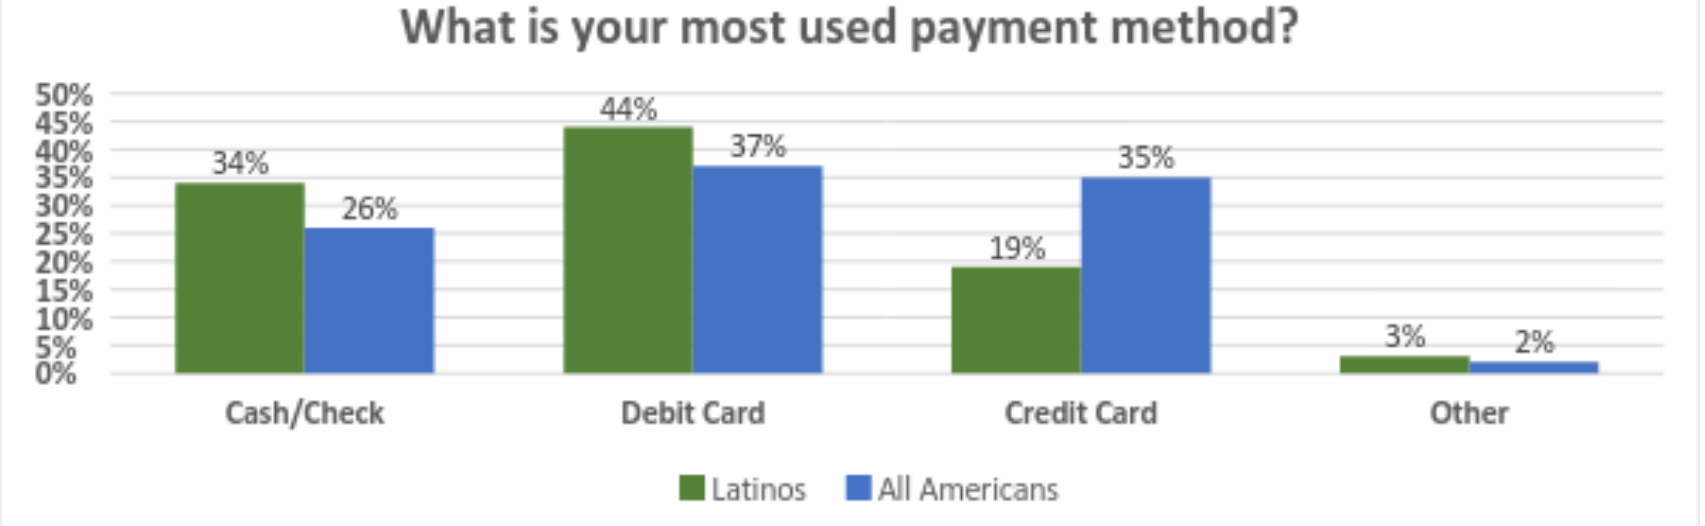 Credit_cards_for_latinos_first_image.png